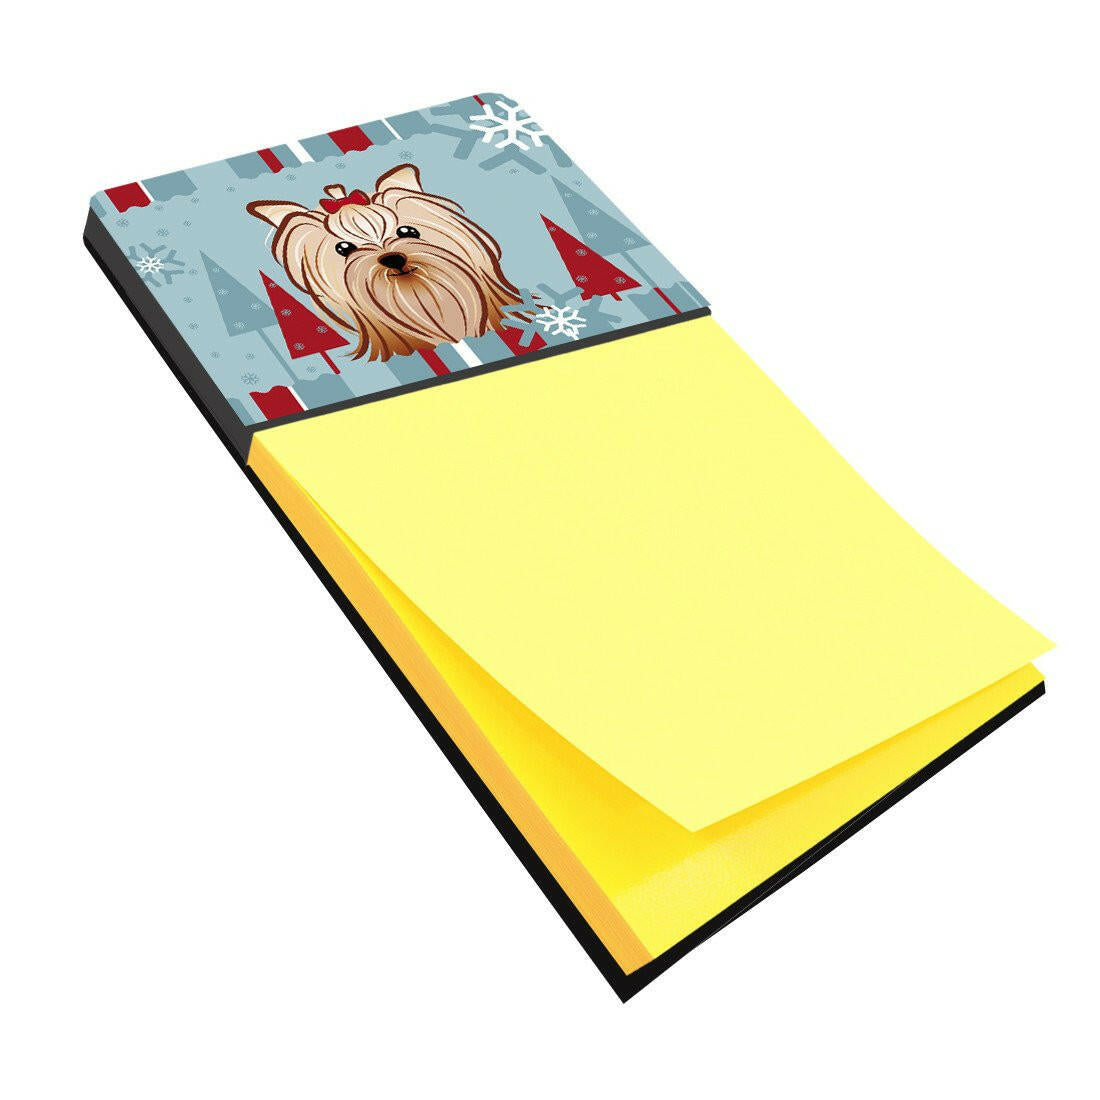 Winter Holiday Yorkie Yorkshire Terrier Sticky Note Holder BB1700SN by Caroline's Treasures